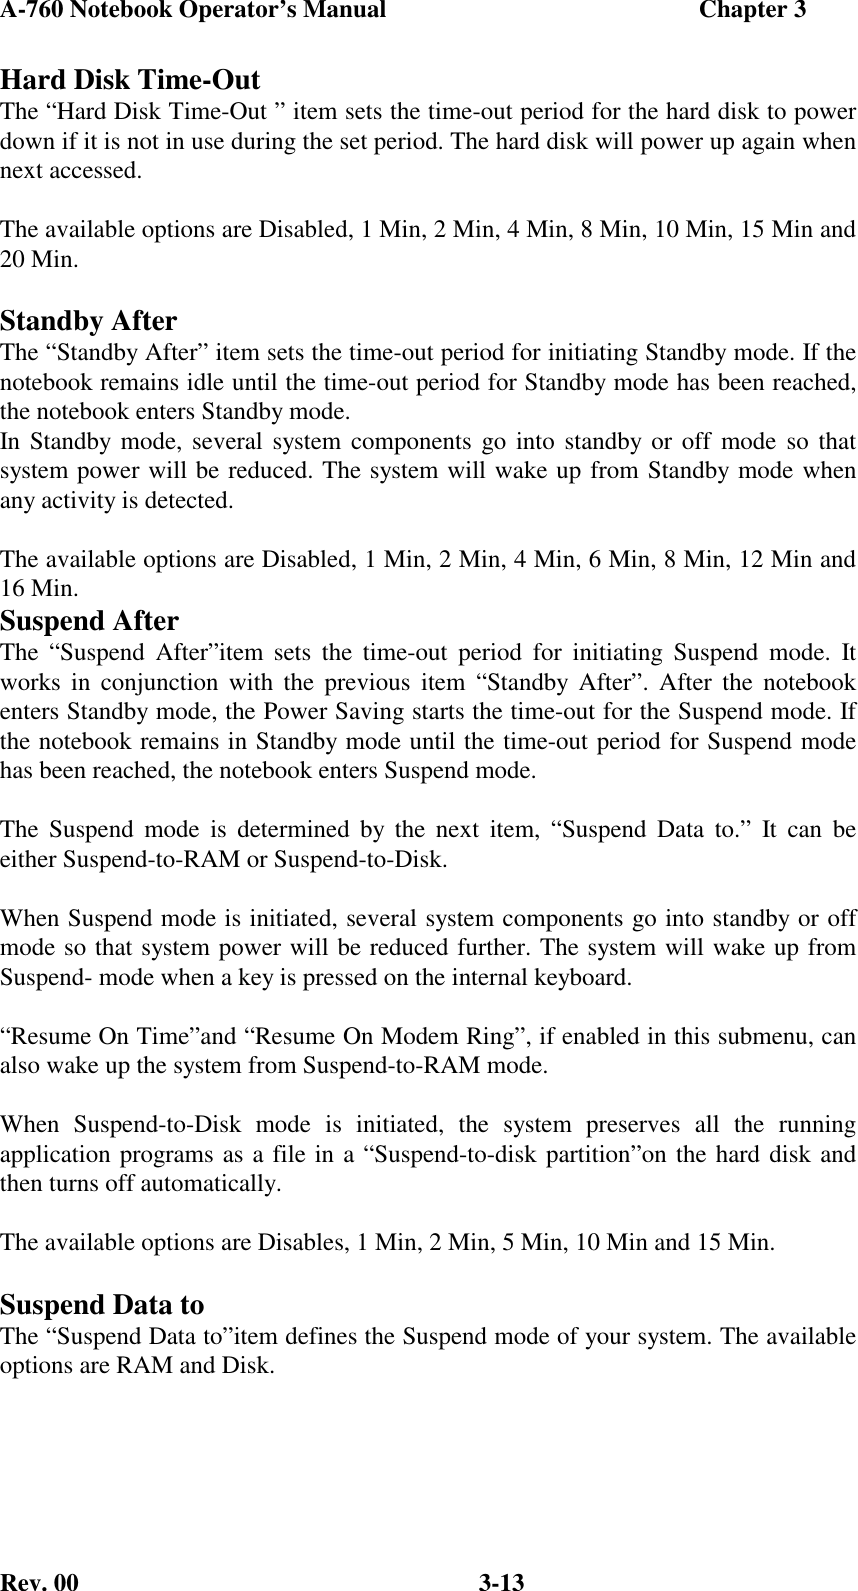 A-760 Notebook Operator’s Manual                                                  Chapter 3Rev. 00 3-13Hard Disk Time-OutThe “Hard Disk Time-Out ” item sets the time-out period for the hard disk to powerdown if it is not in use during the set period. The hard disk will power up again whennext accessed.The available options are Disabled, 1 Min, 2 Min, 4 Min, 8 Min, 10 Min, 15 Min and20 Min.Standby AfterThe “Standby After” item sets the time-out period for initiating Standby mode. If thenotebook remains idle until the time-out period for Standby mode has been reached,the notebook enters Standby mode.In Standby mode, several system components go into standby or off mode so thatsystem power will be reduced. The system will wake up from Standby mode whenany activity is detected.The available options are Disabled, 1 Min, 2 Min, 4 Min, 6 Min, 8 Min, 12 Min and16 Min.Suspend AfterThe “Suspend After”item sets the time-out period for initiating Suspend mode. Itworks in conjunction with the previous item “Standby After”. After the notebookenters Standby mode, the Power Saving starts the time-out for the Suspend mode. Ifthe notebook remains in Standby mode until the time-out period for Suspend modehas been reached, the notebook enters Suspend mode.The Suspend mode is determined by the next item, “Suspend Data to.” It can beeither Suspend-to-RAM or Suspend-to-Disk.When Suspend mode is initiated, several system components go into standby or offmode so that system power will be reduced further. The system will wake up fromSuspend- mode when a key is pressed on the internal keyboard.“Resume On Time”and “Resume On Modem Ring”, if enabled in this submenu, canalso wake up the system from Suspend-to-RAM mode.When Suspend-to-Disk mode is initiated, the system preserves all the runningapplication programs as a file in a “Suspend-to-disk partition”on the hard disk andthen turns off automatically.The available options are Disables, 1 Min, 2 Min, 5 Min, 10 Min and 15 Min.Suspend Data toThe “Suspend Data to”item defines the Suspend mode of your system. The availableoptions are RAM and Disk.